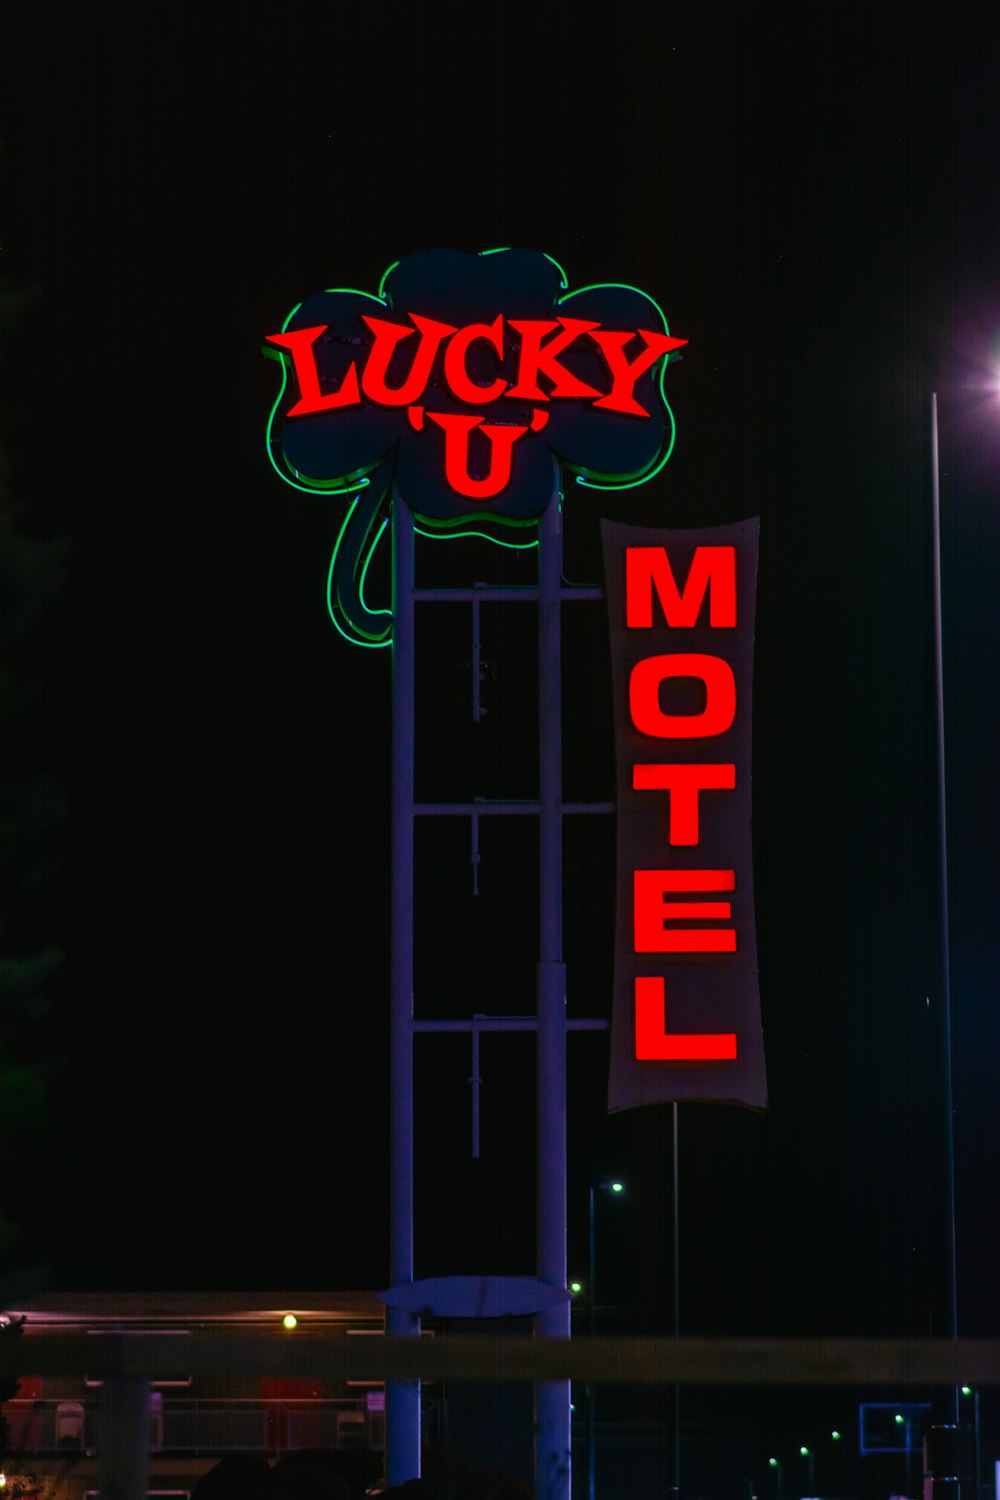 a neon sign for a motel lit up at night